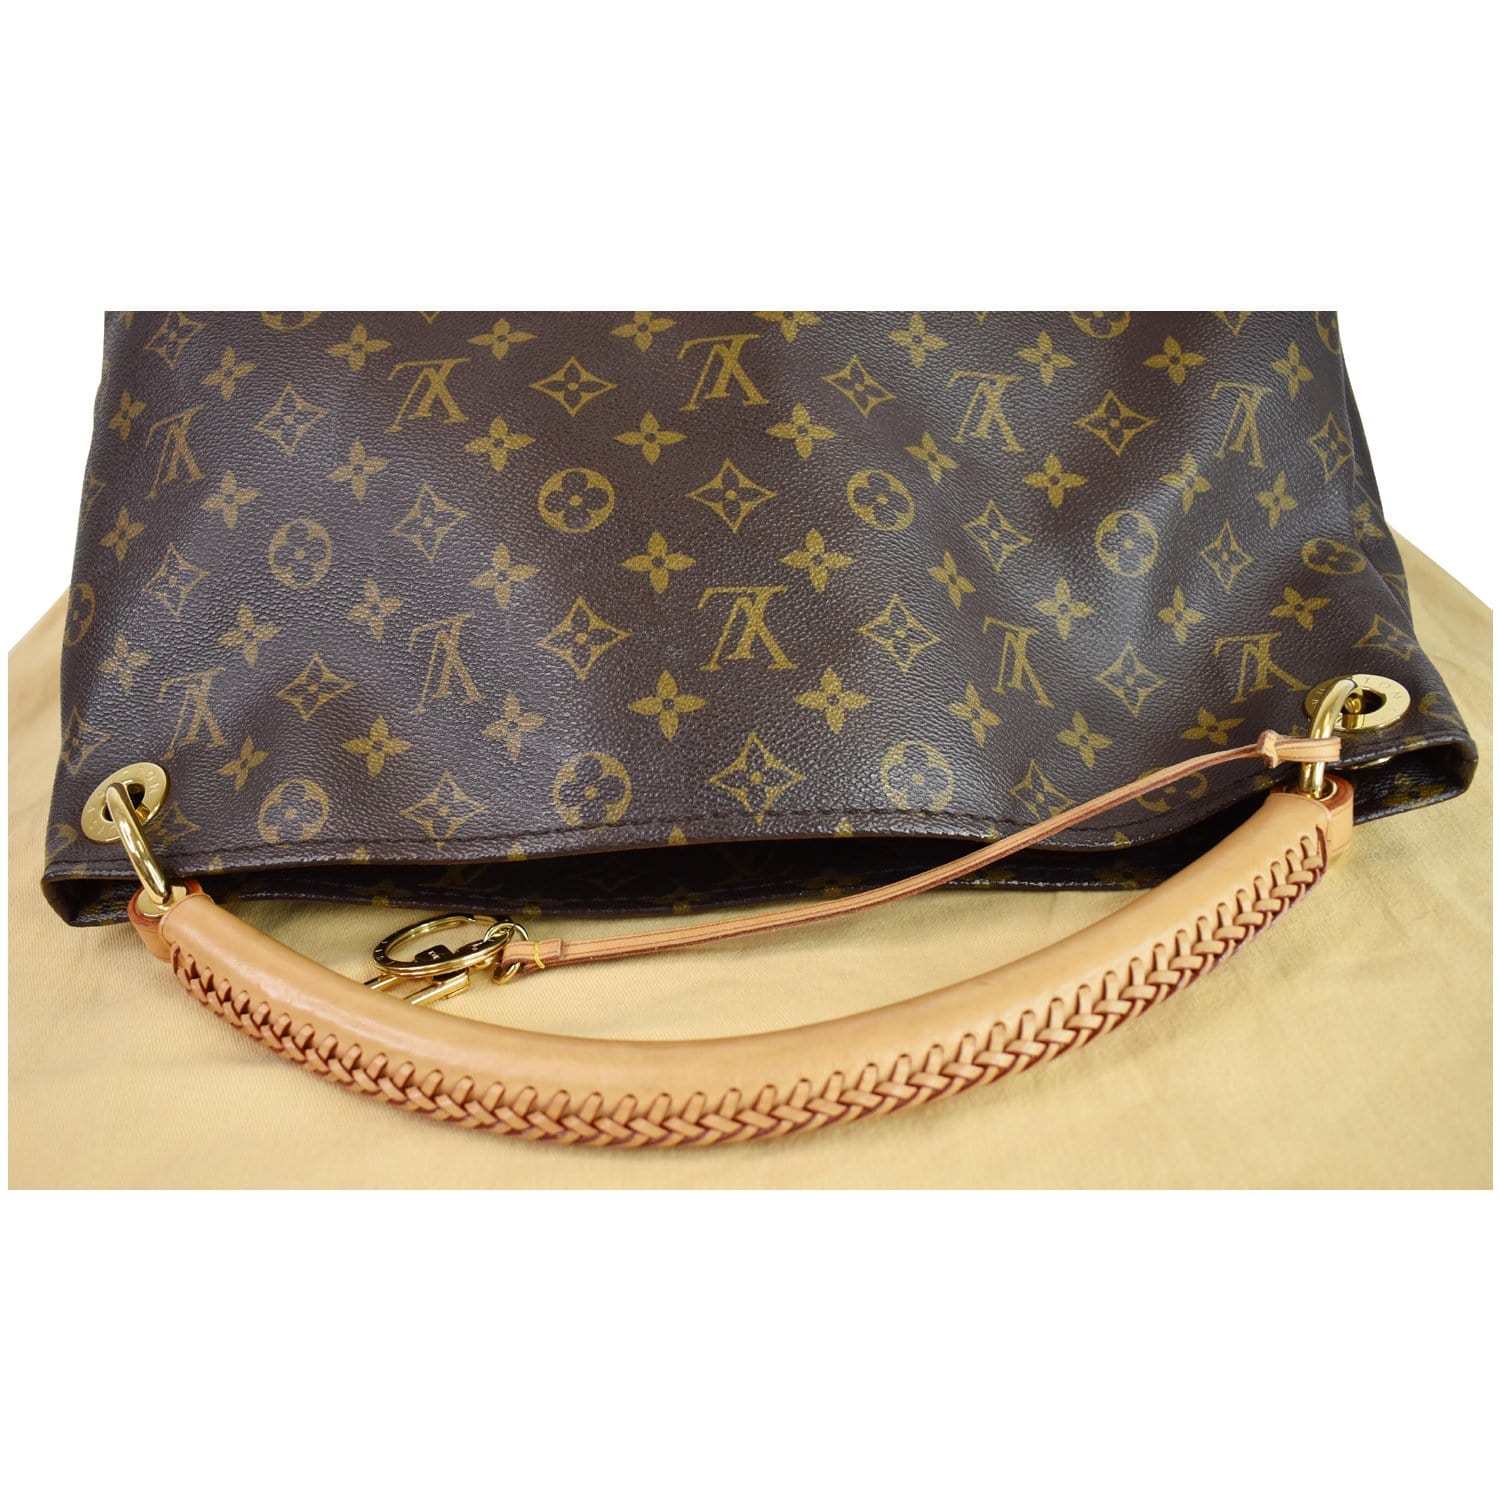 Louis Vuitton Artsy Bags - 38 For Sale on 1stDibs  louis vitton artsy, louis  vuitton artsy for sale, luis vuitton artsy